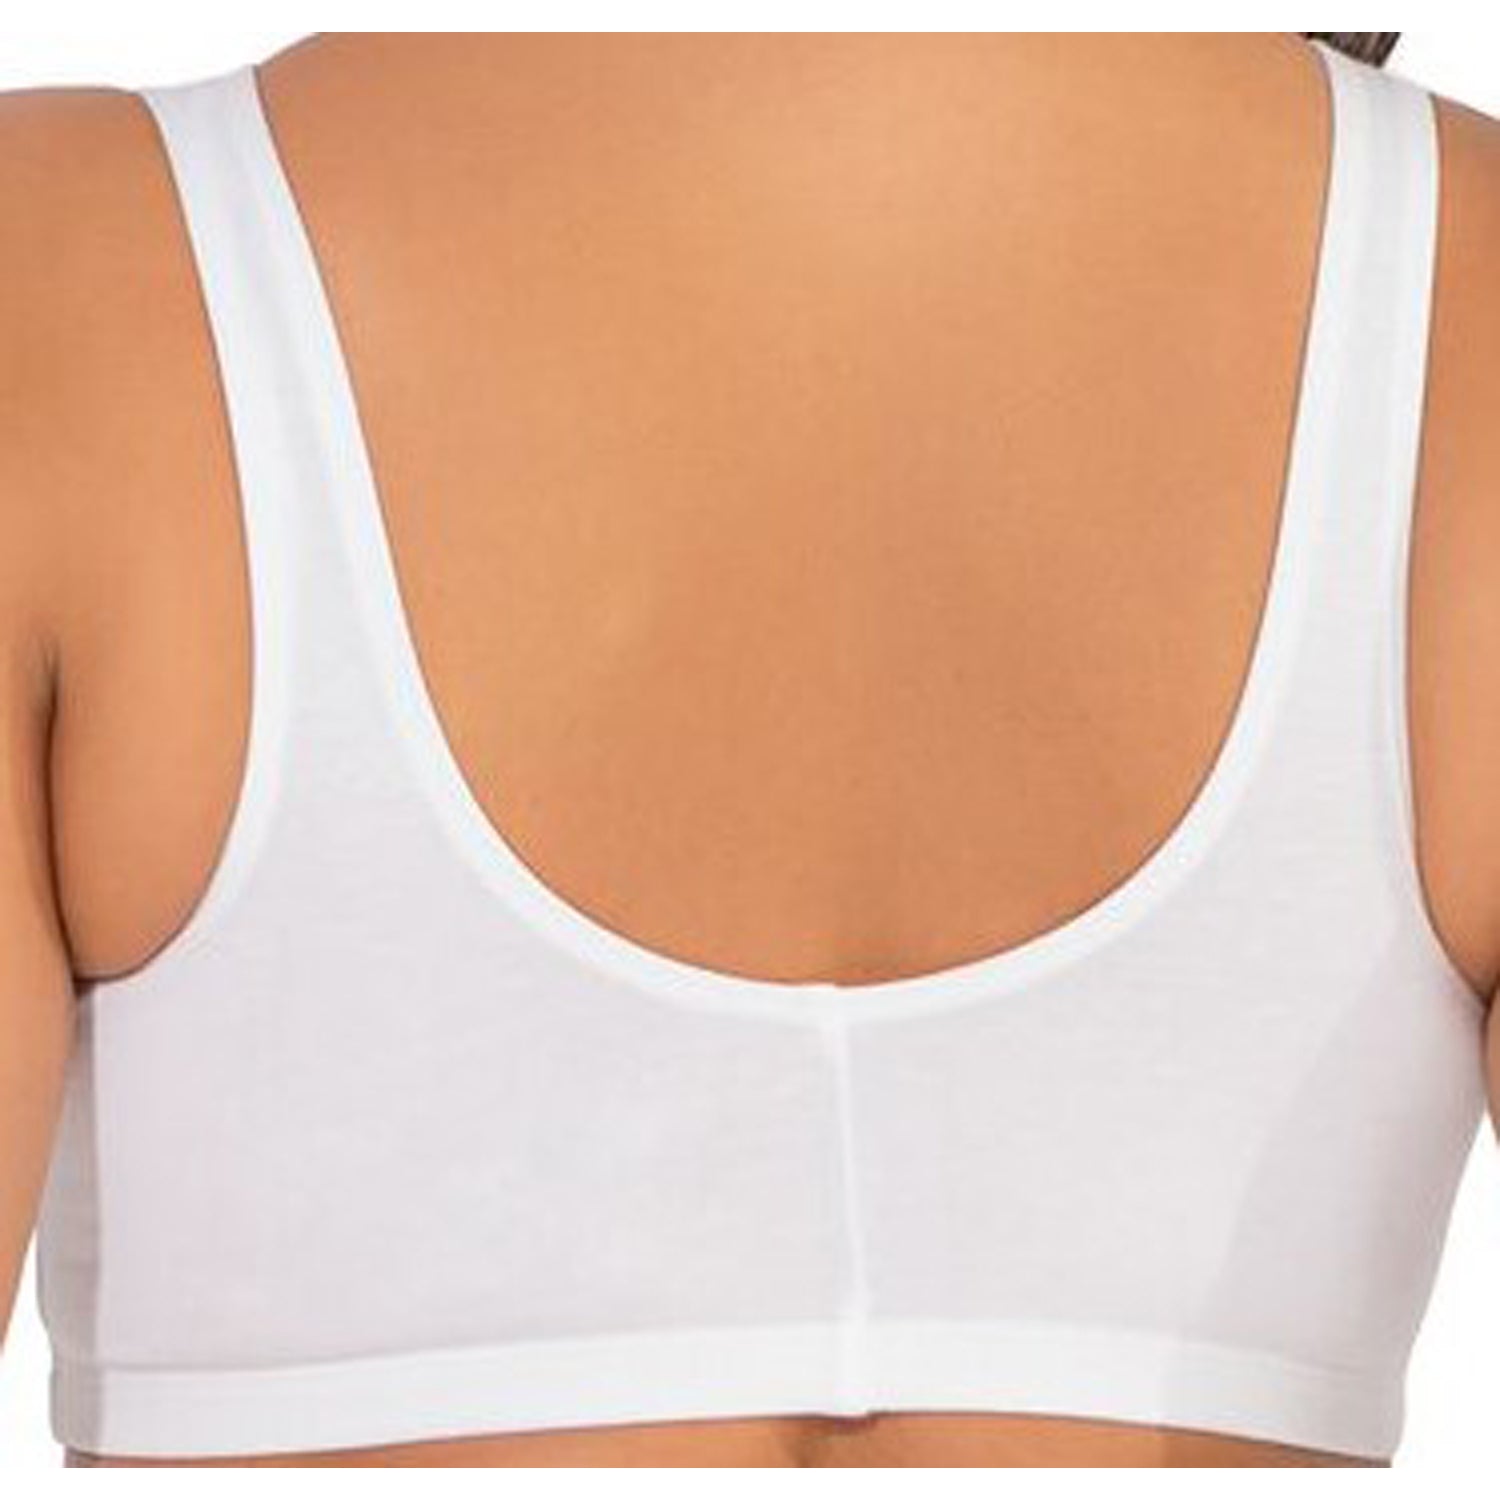 Fruit of the Loom Women's Comfort Front Close Sports Bra, Style 96014 